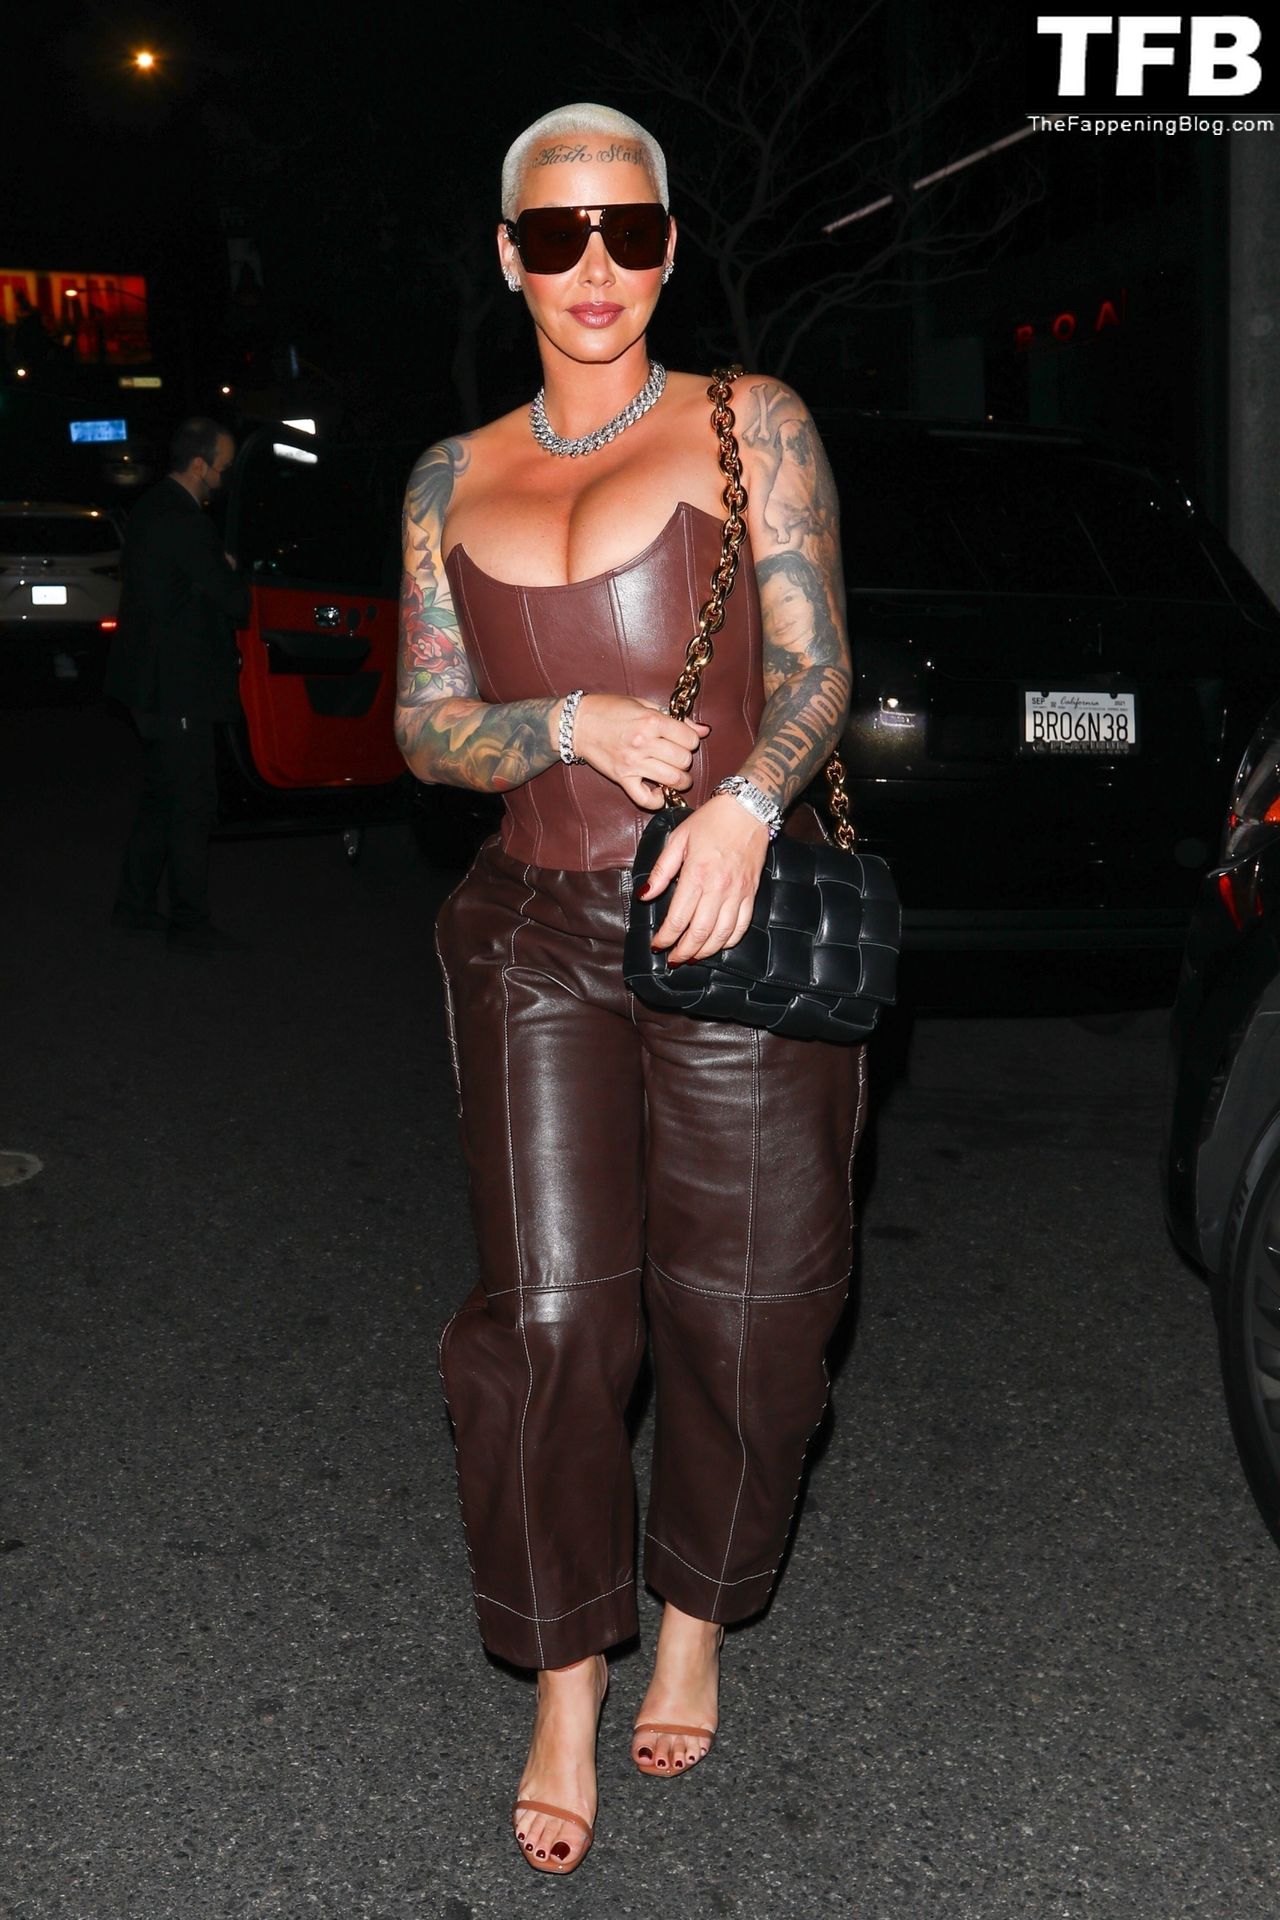 Amber-Rose-Sexy-The-Fappening-Blog-37.jpg